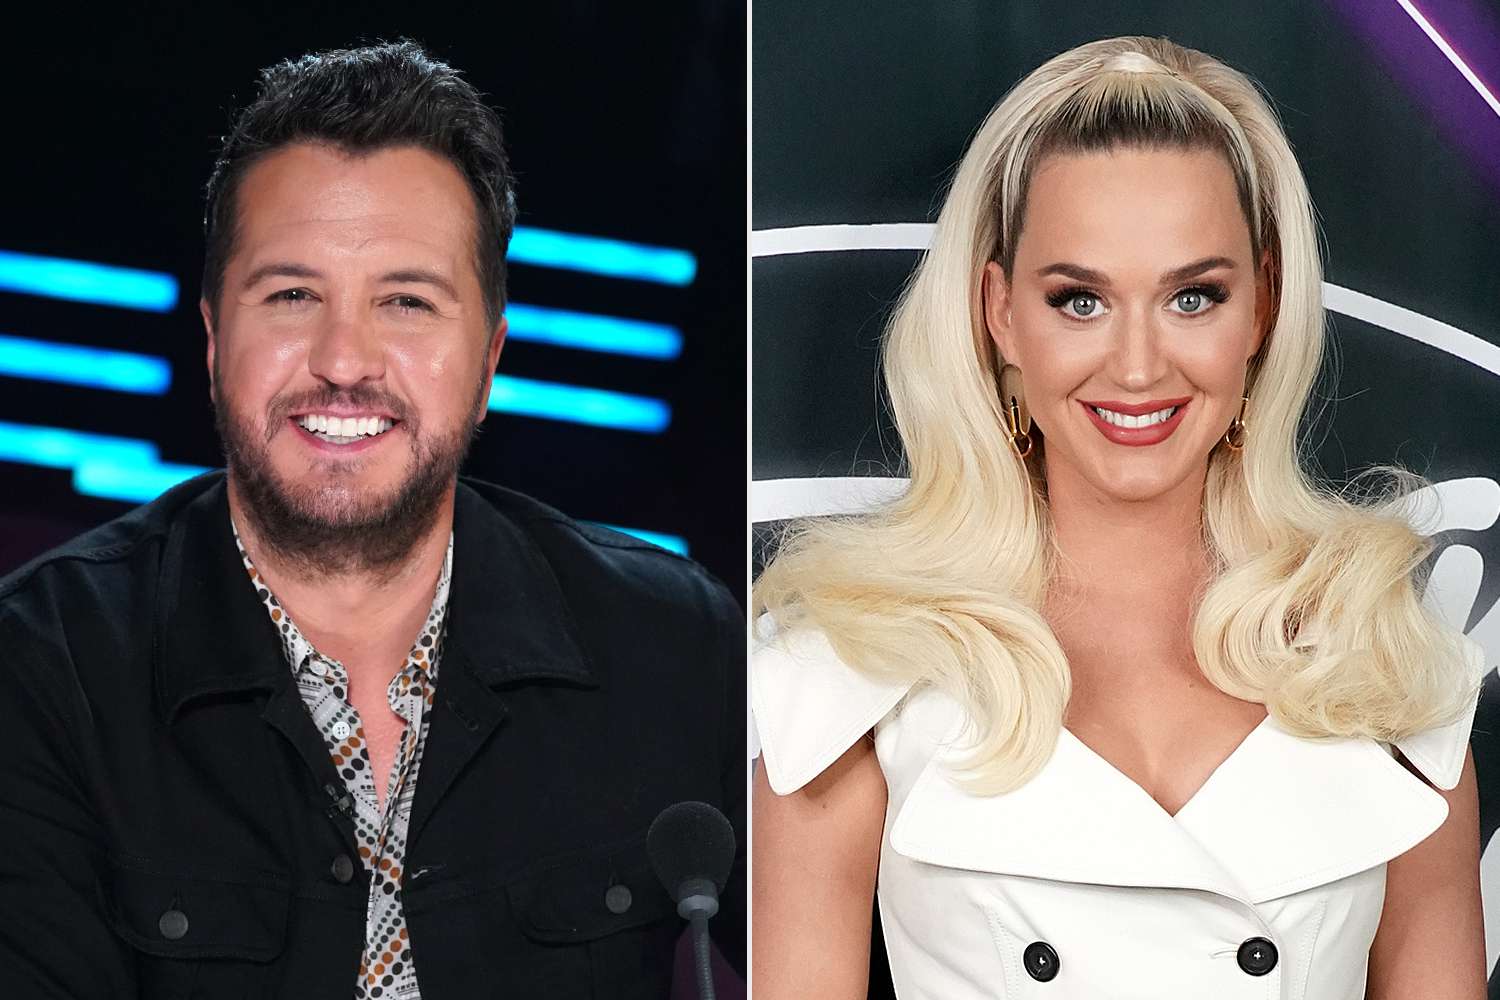 Luke Bryan Comes to Katy Perry’s Defense After Brutal ‘American Idol’ Season – Here’s What He Said! 9